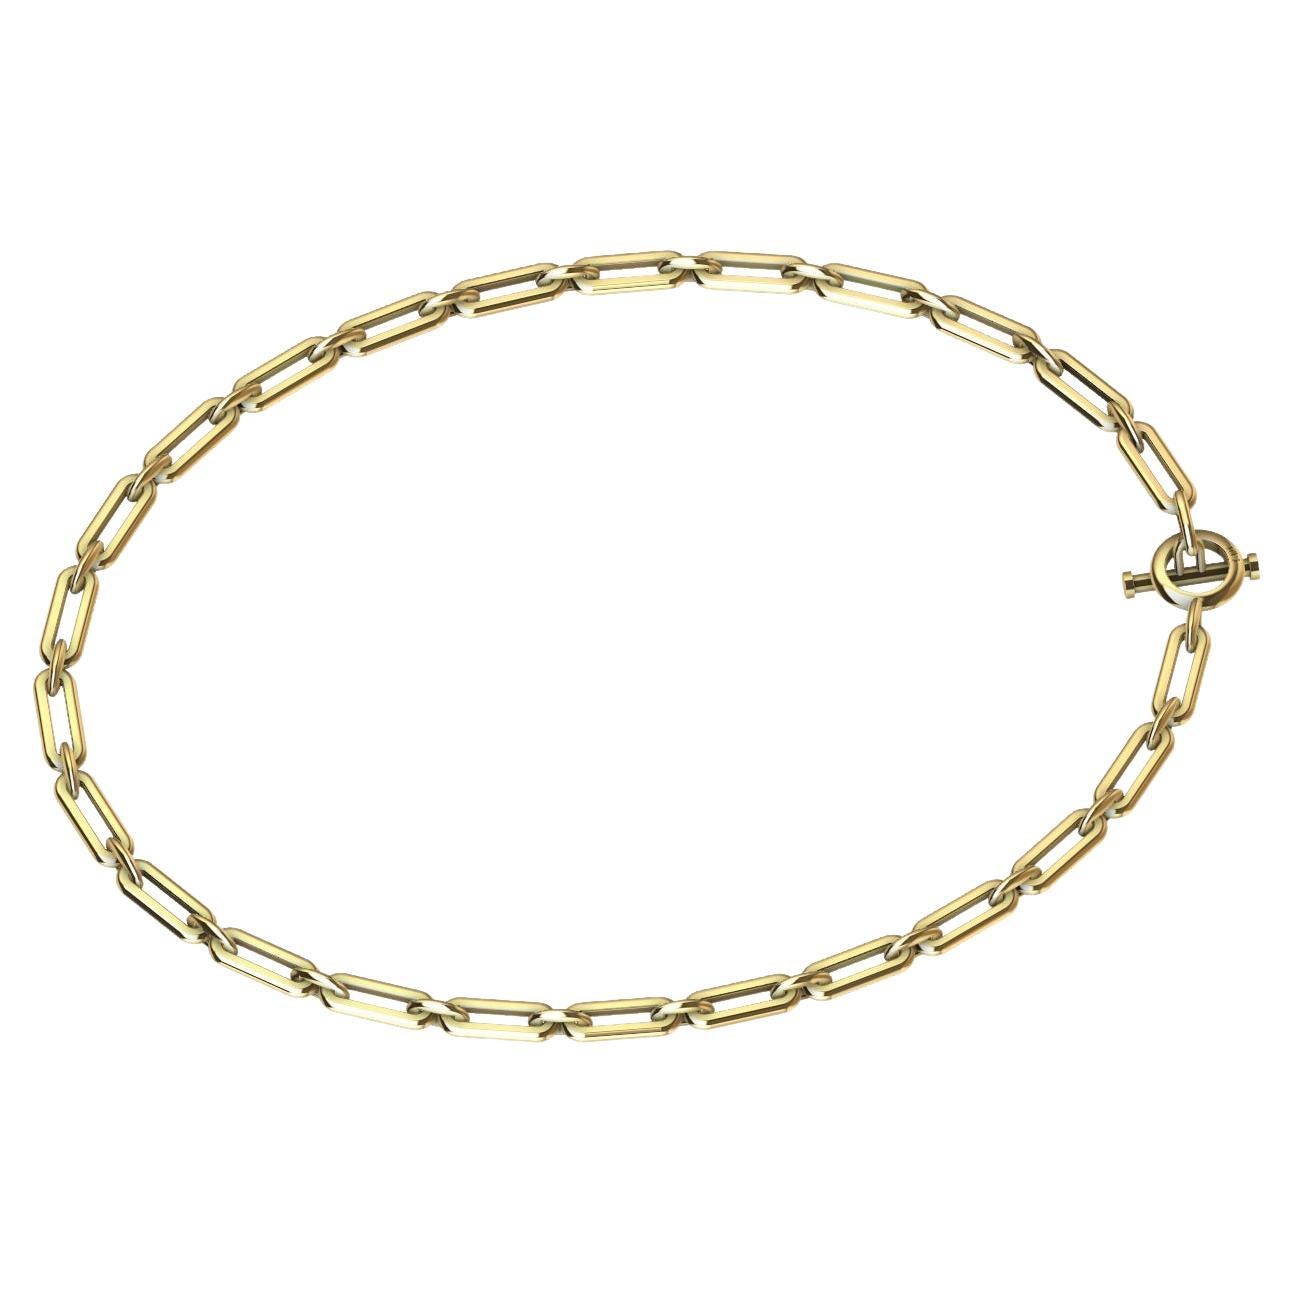 Vintage Chain Necklaces - 9,612 For Sale at 1stdibs | gold chains